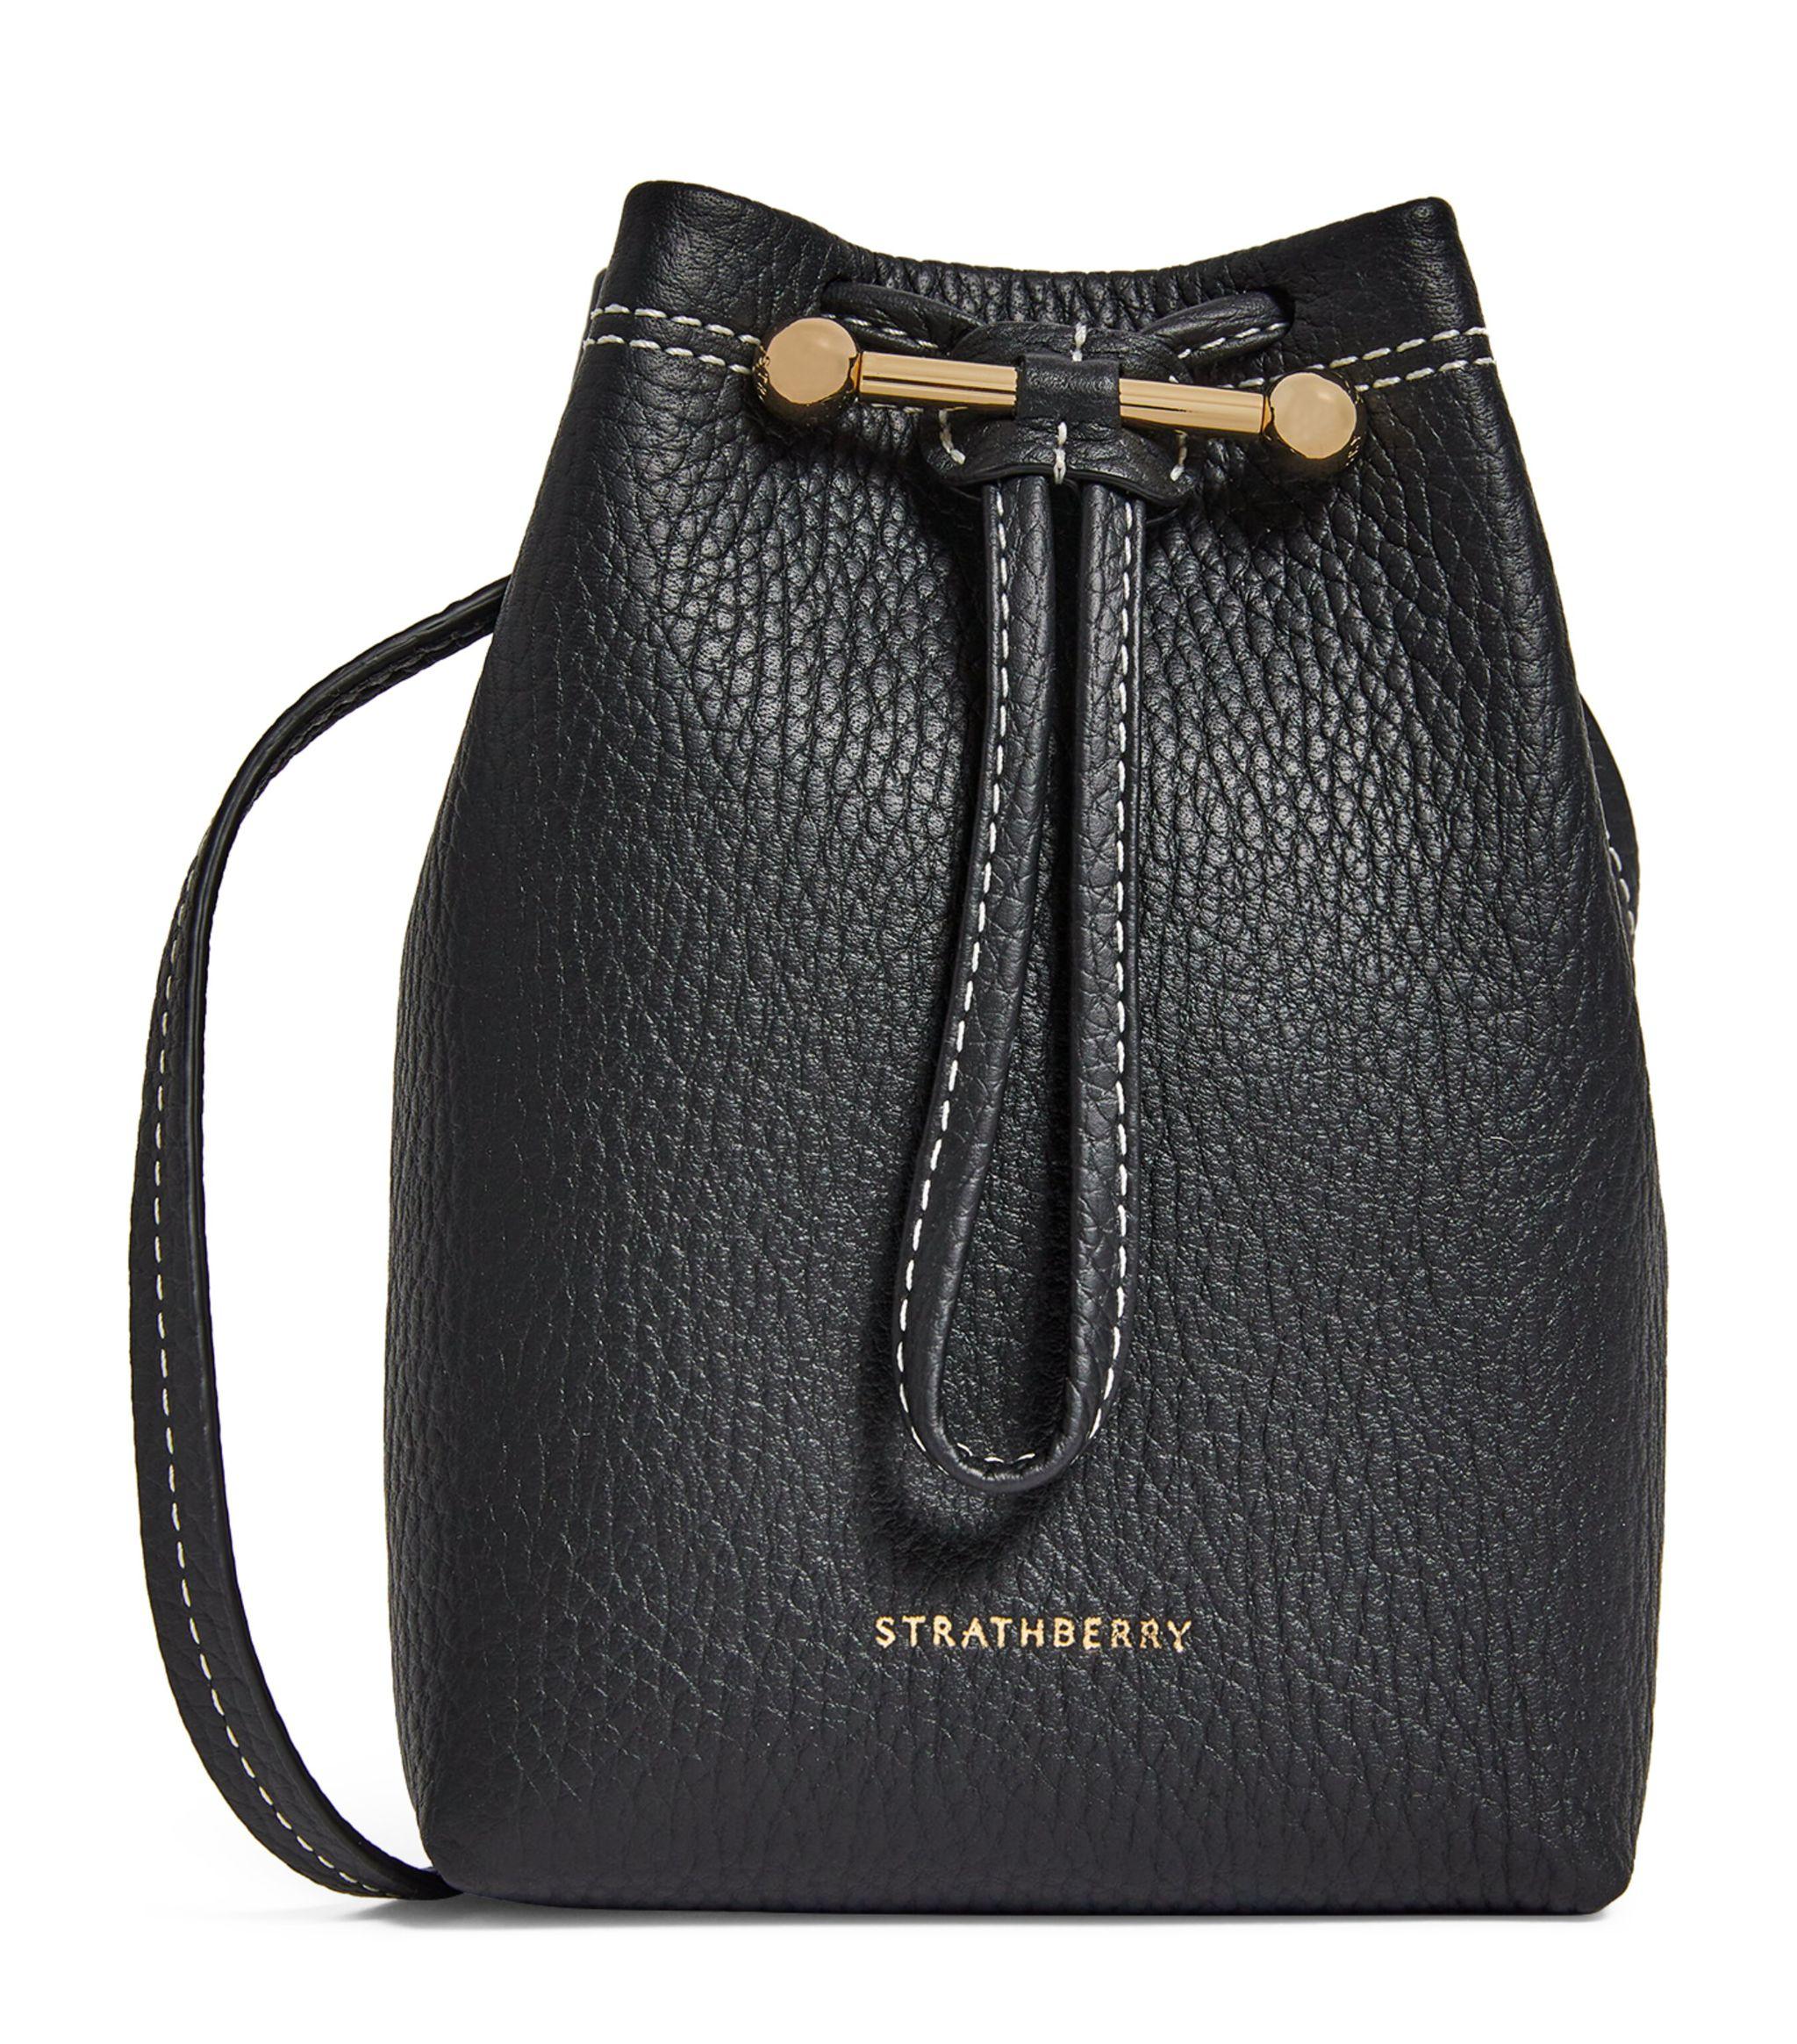 Strathberry Small Leather Lana Osette Bucket Bag in Black